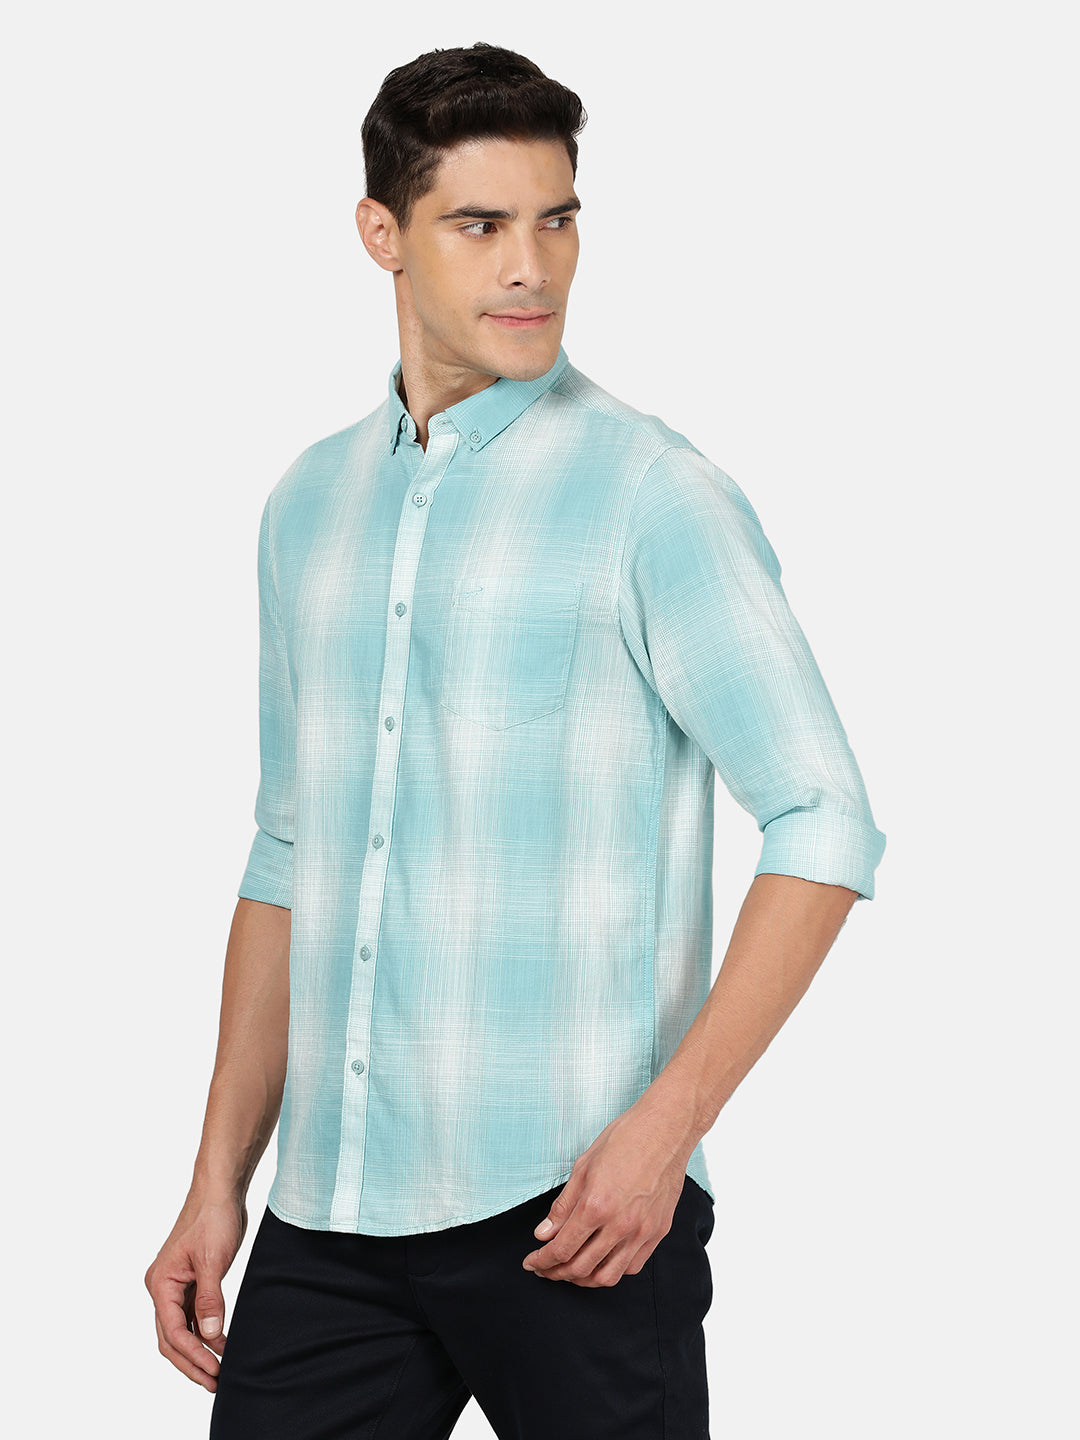 Crocodile Men's Casual Full Sleeve Comfort Fit Checks Light Green With Collar Shirt Online